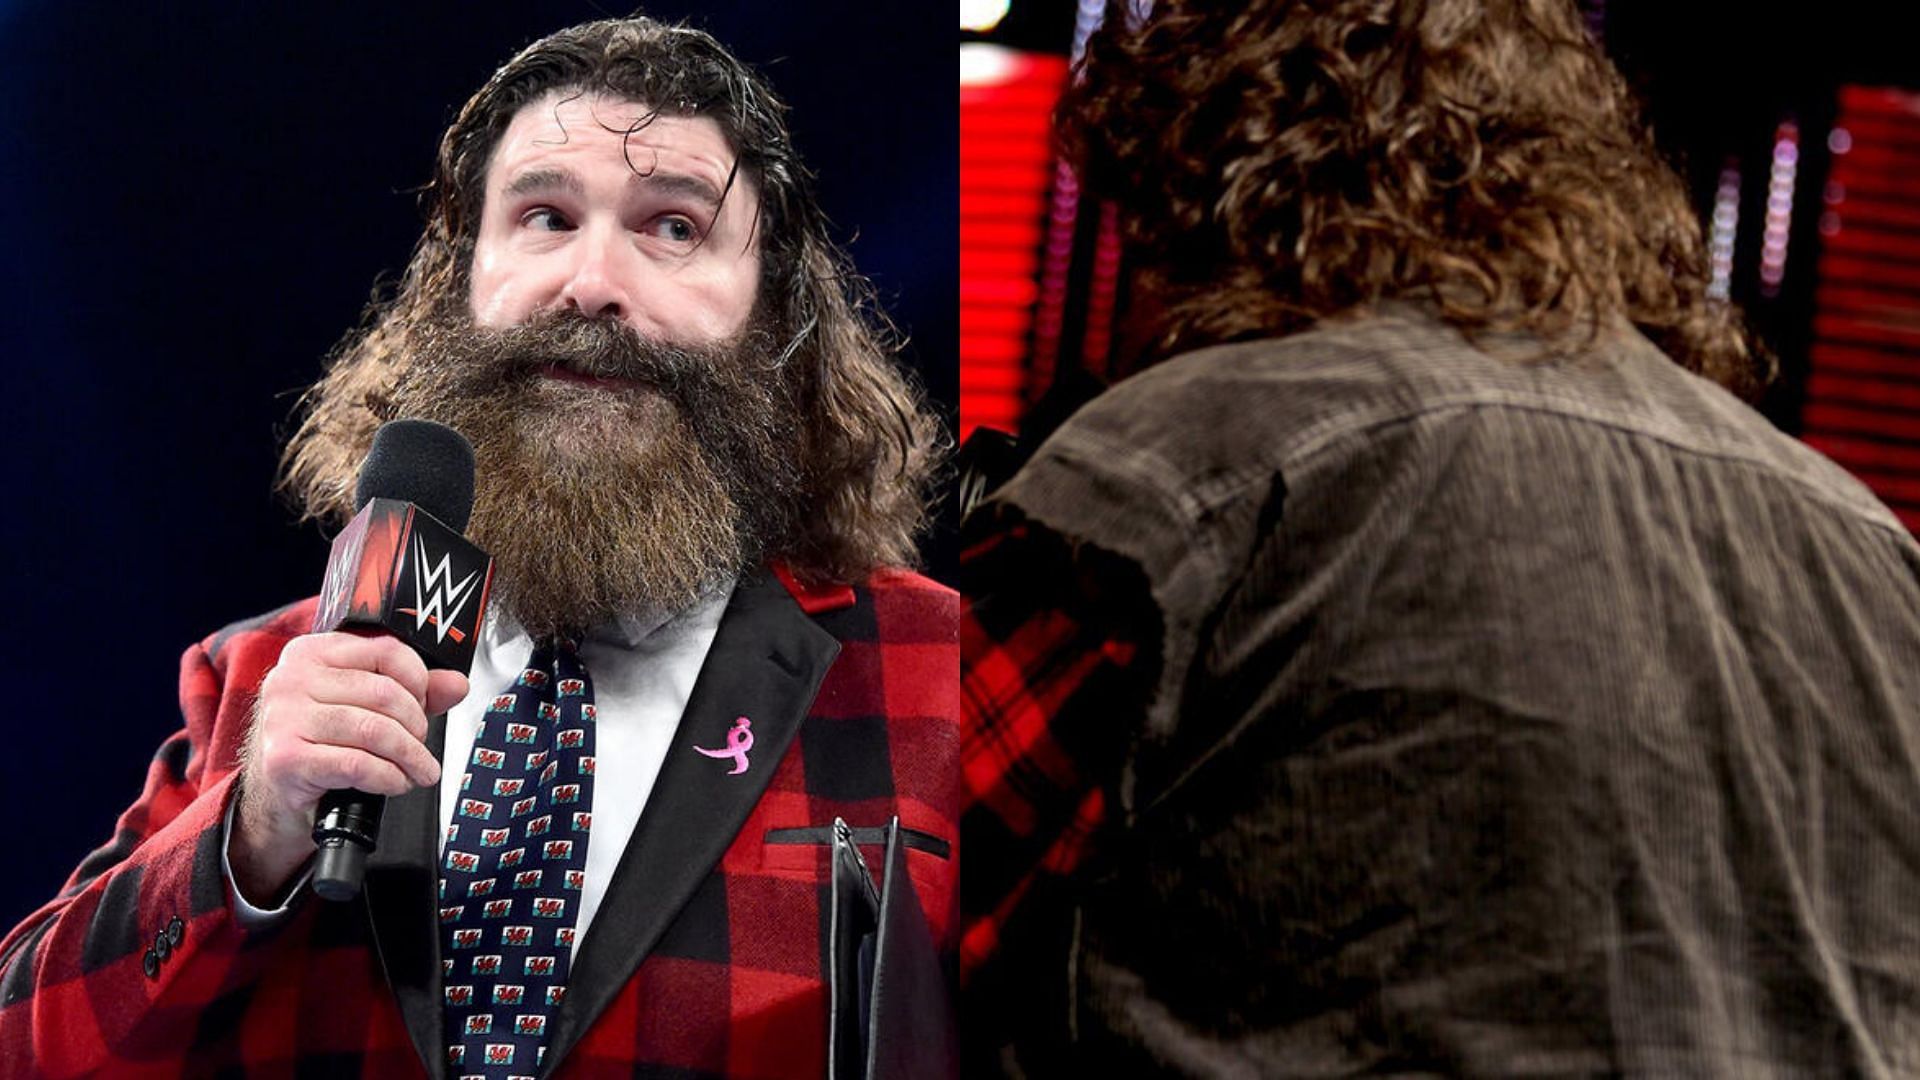 Mick Foley is one of the biggest names in wrestling